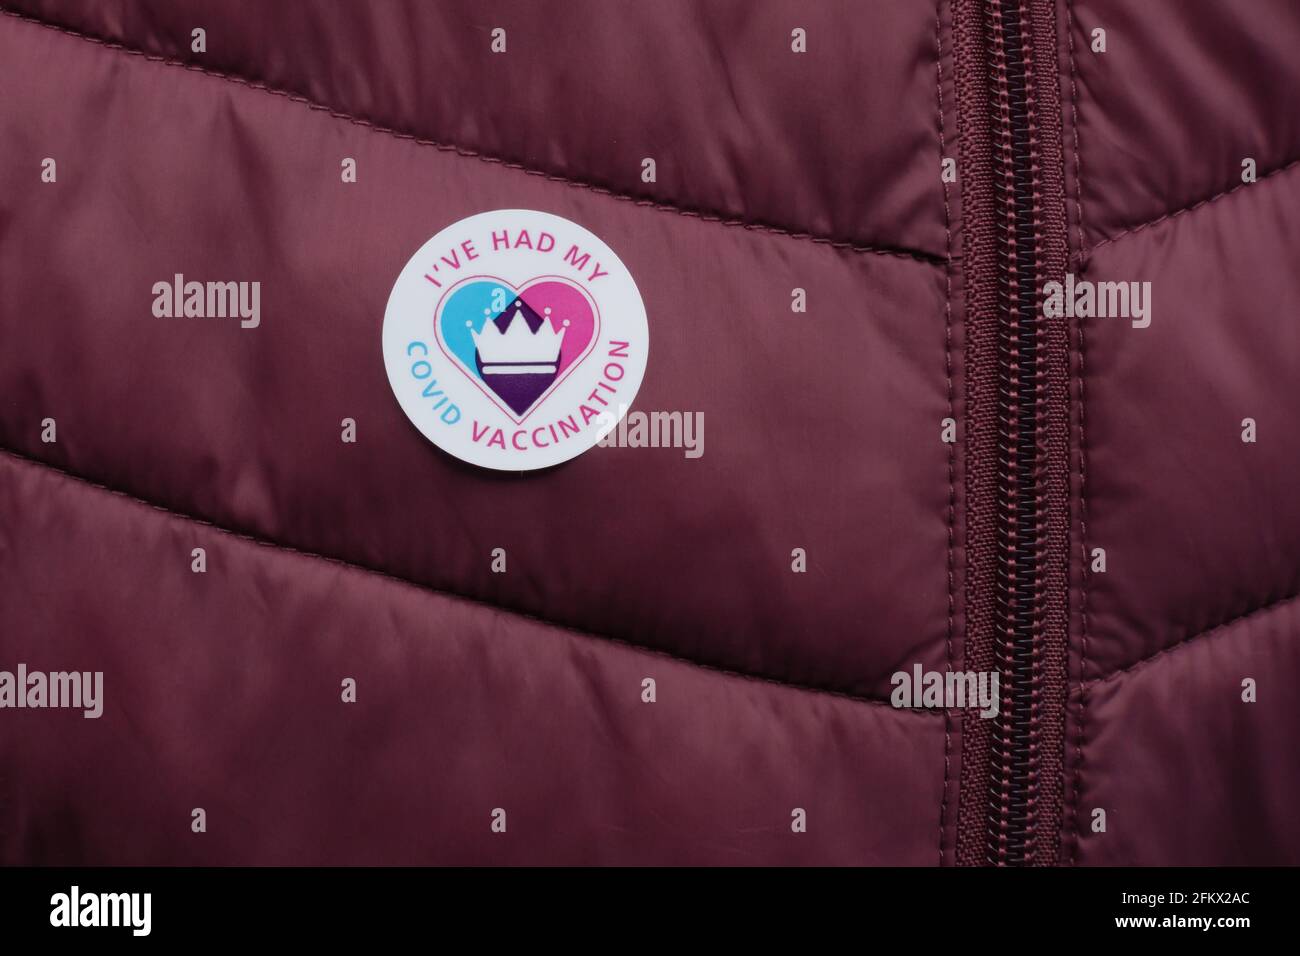 'I've had my Covid Vaccination' sticker badge on maroon quilted jacket. Stock Photo